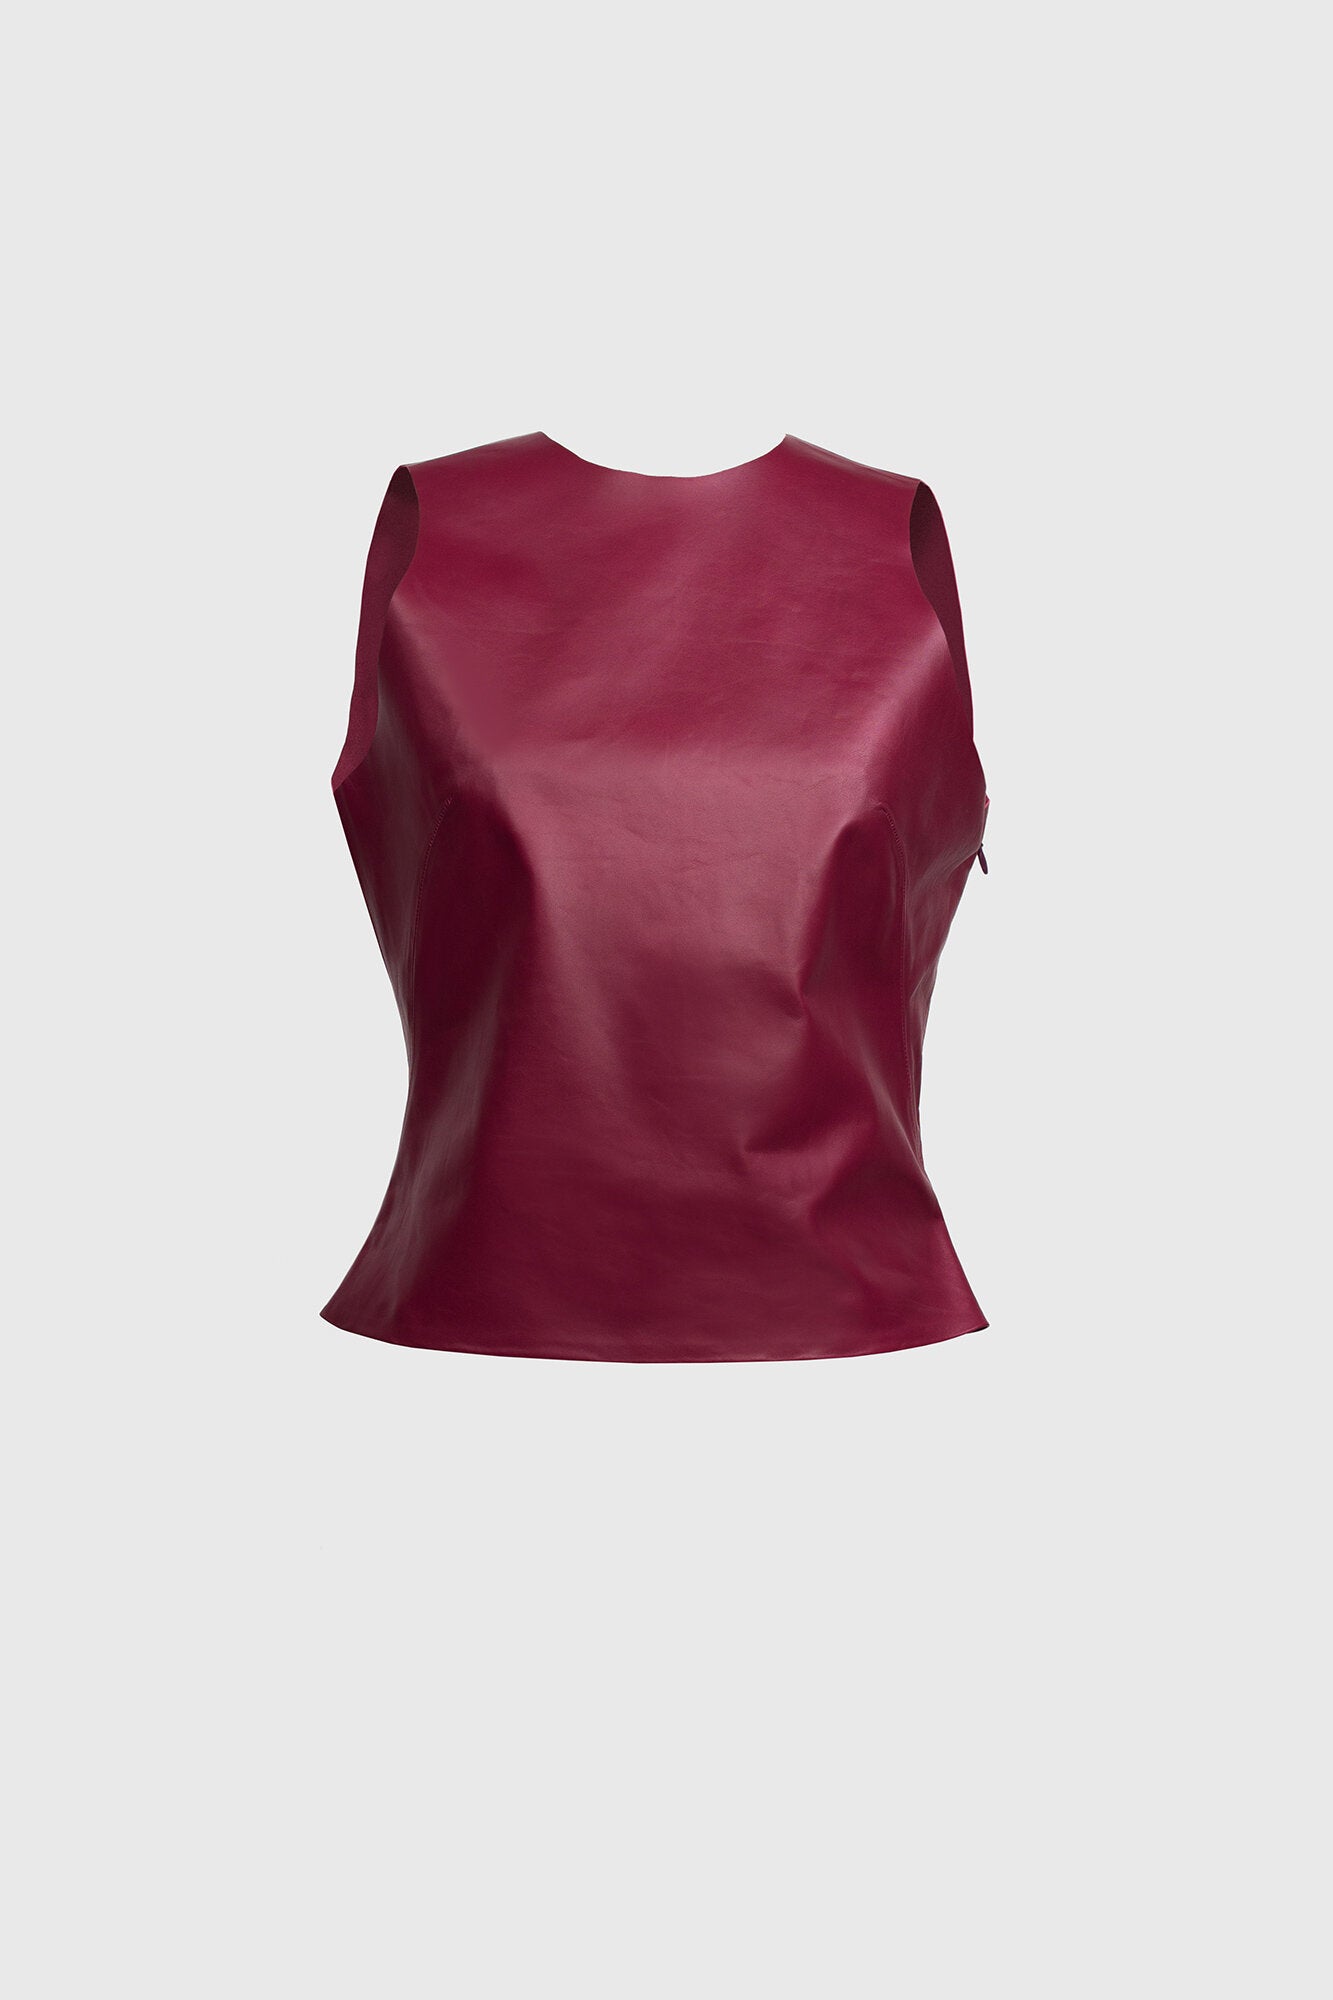 Valentine's Red Leather Top